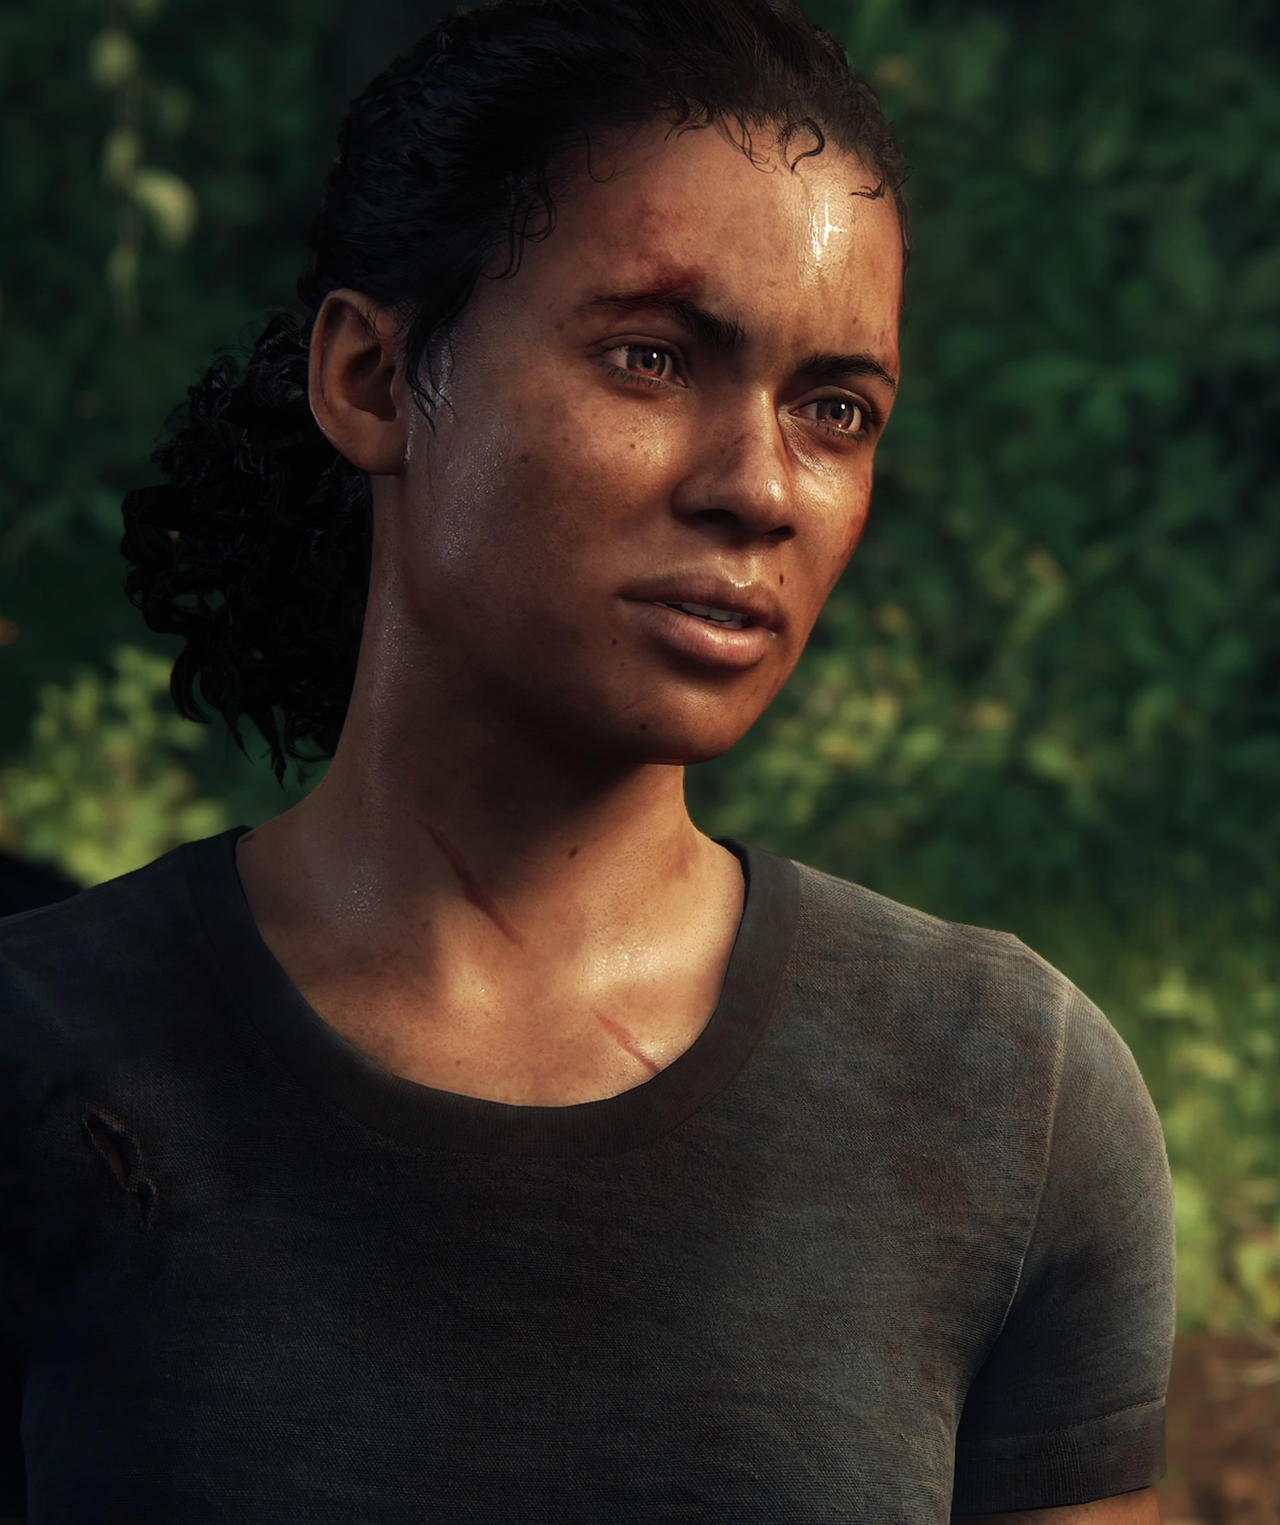 Abby Transformation In The Last of Us 2 by mikelshehata on DeviantArt